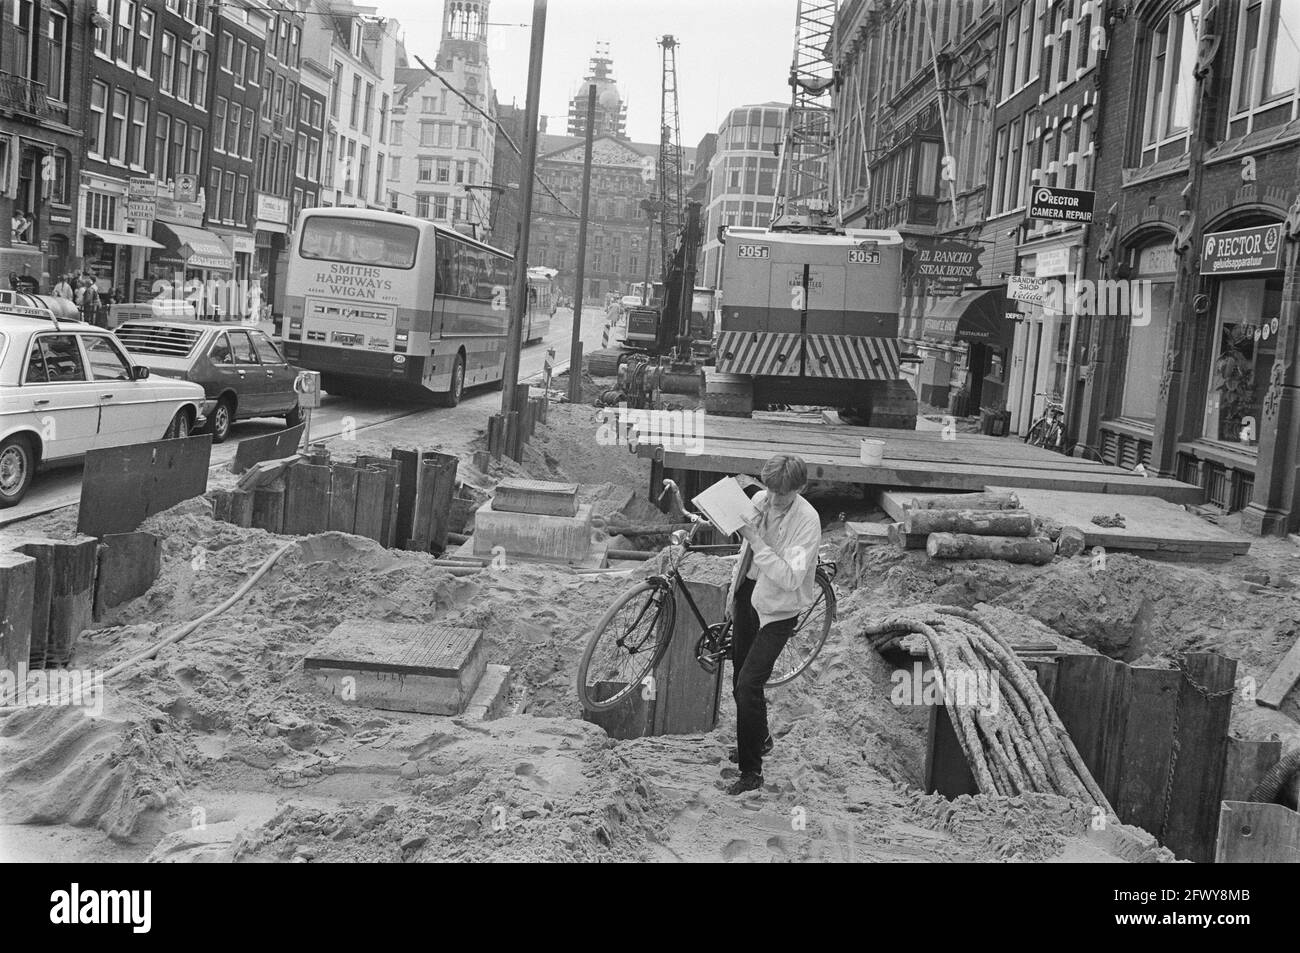 Raadhuisstraat in Amsterdam broken up because of work on rails, sewers etc., July 12, 1984, Work, sewers, streets, The Netherlands, 20th century press Stock Photo